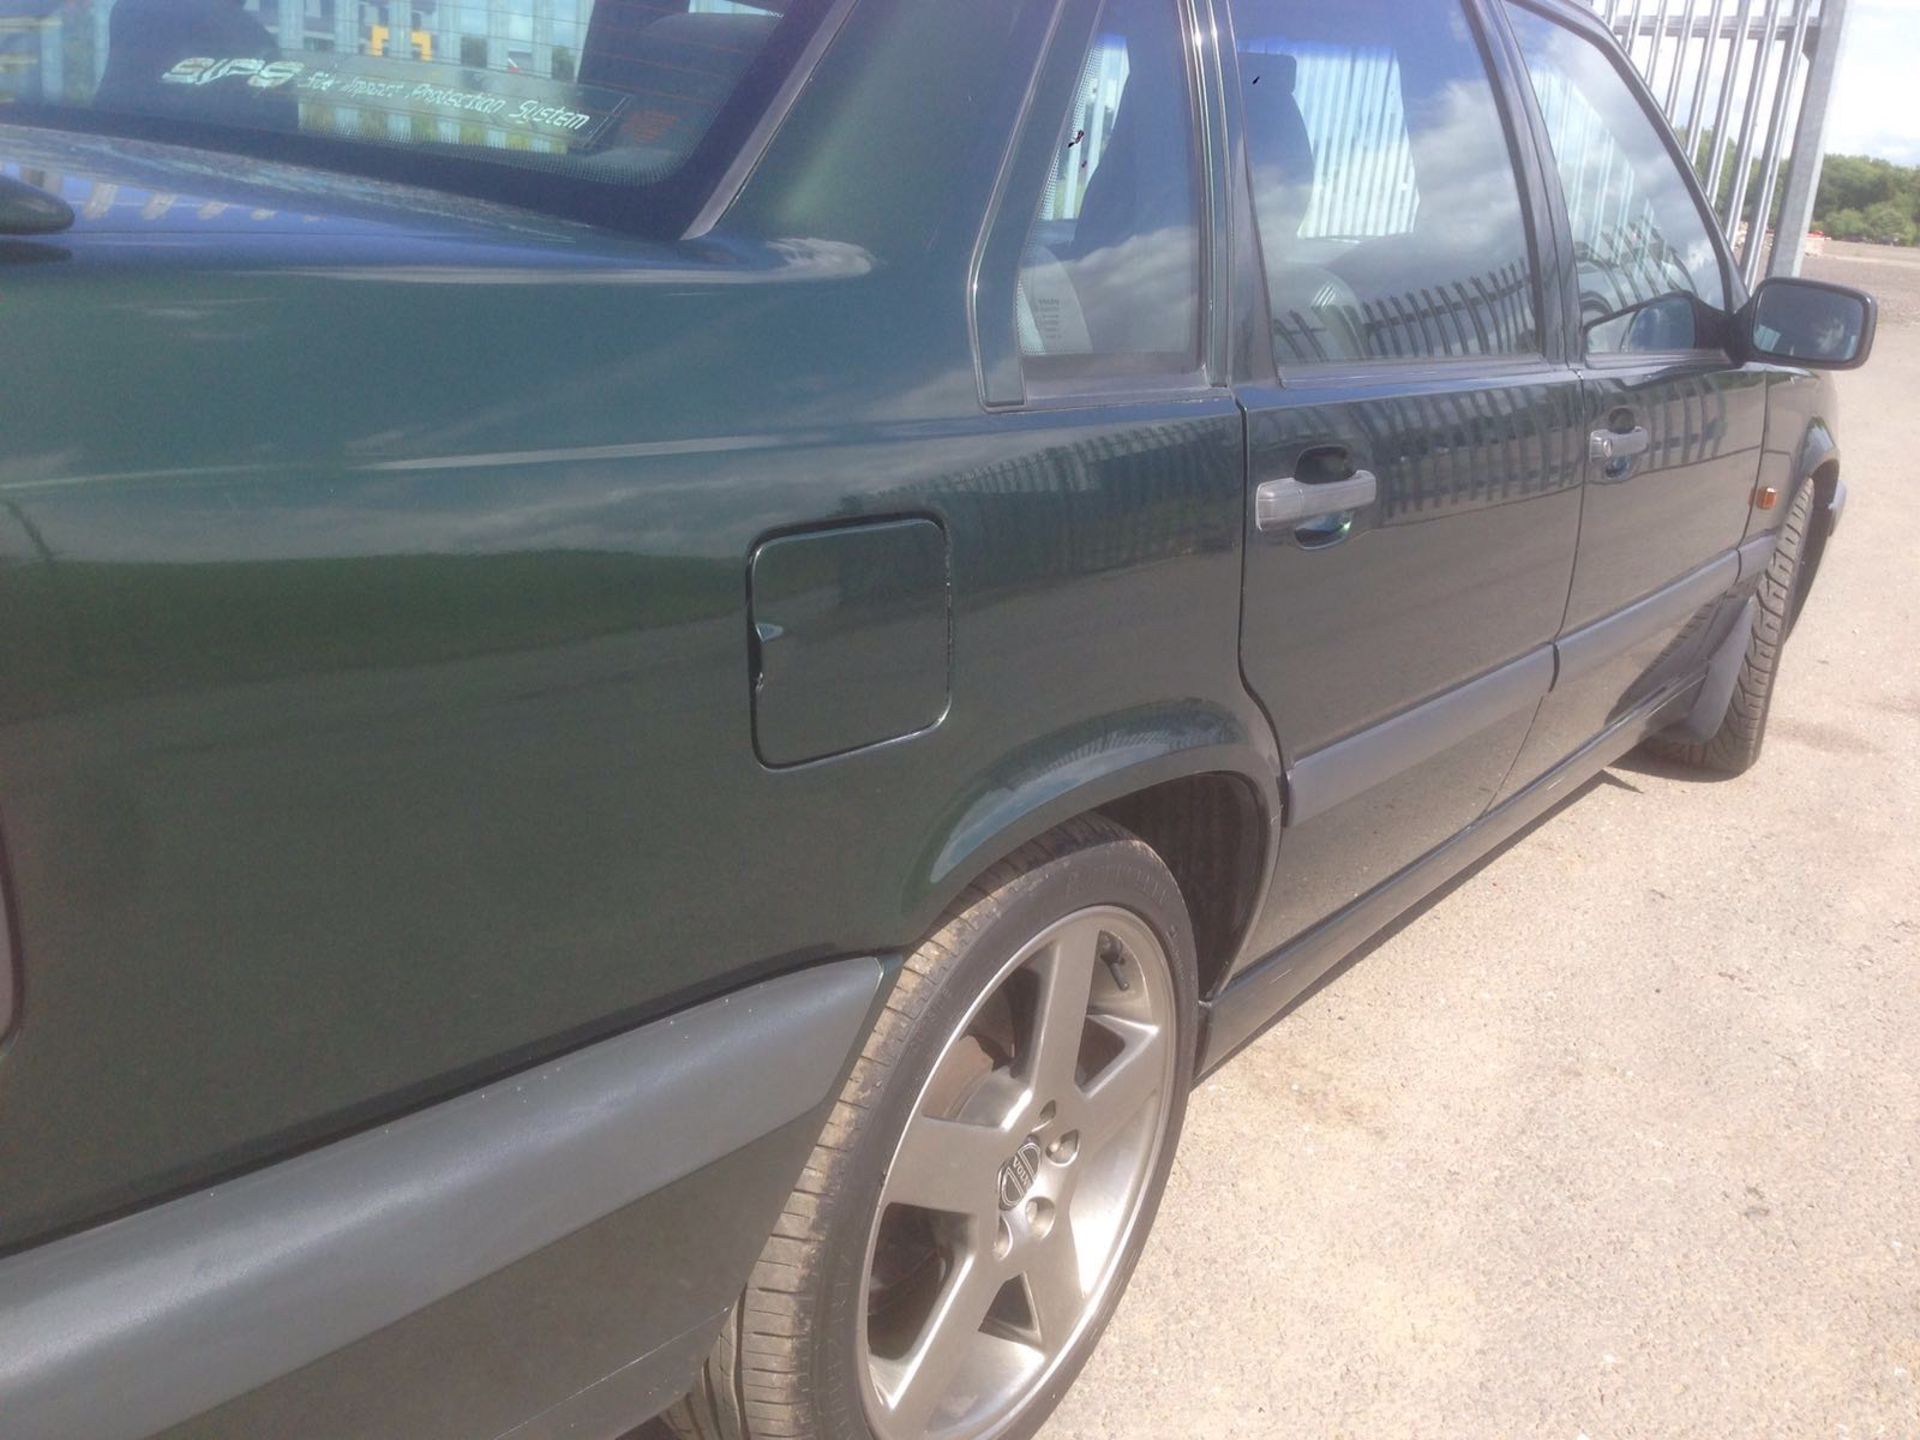 VOLVO T5-R saloon auto, 1995/N. olive green, 2 previous owners from new. - Image 5 of 20